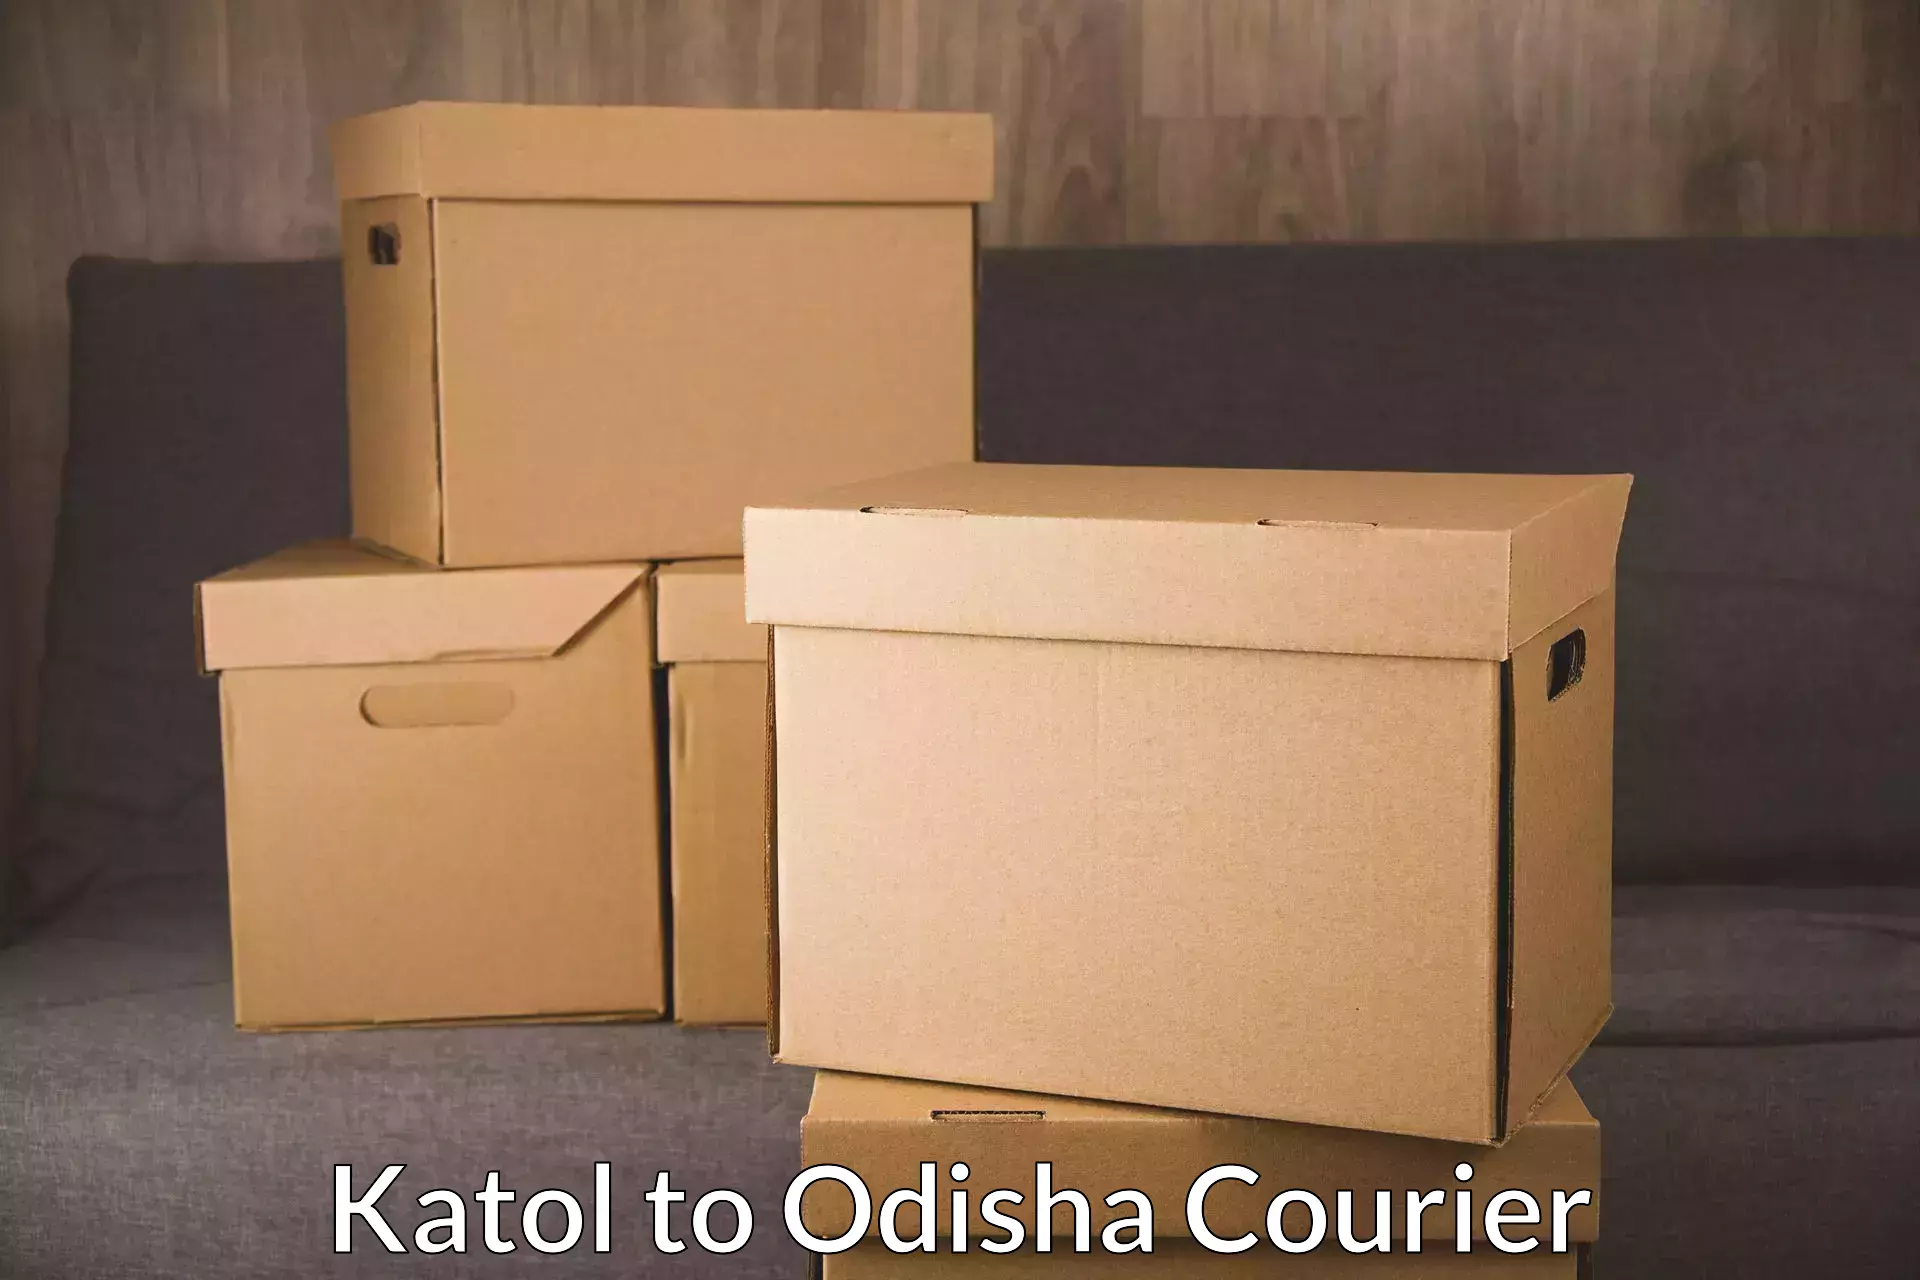 Nationwide courier service in Katol to Pottangi